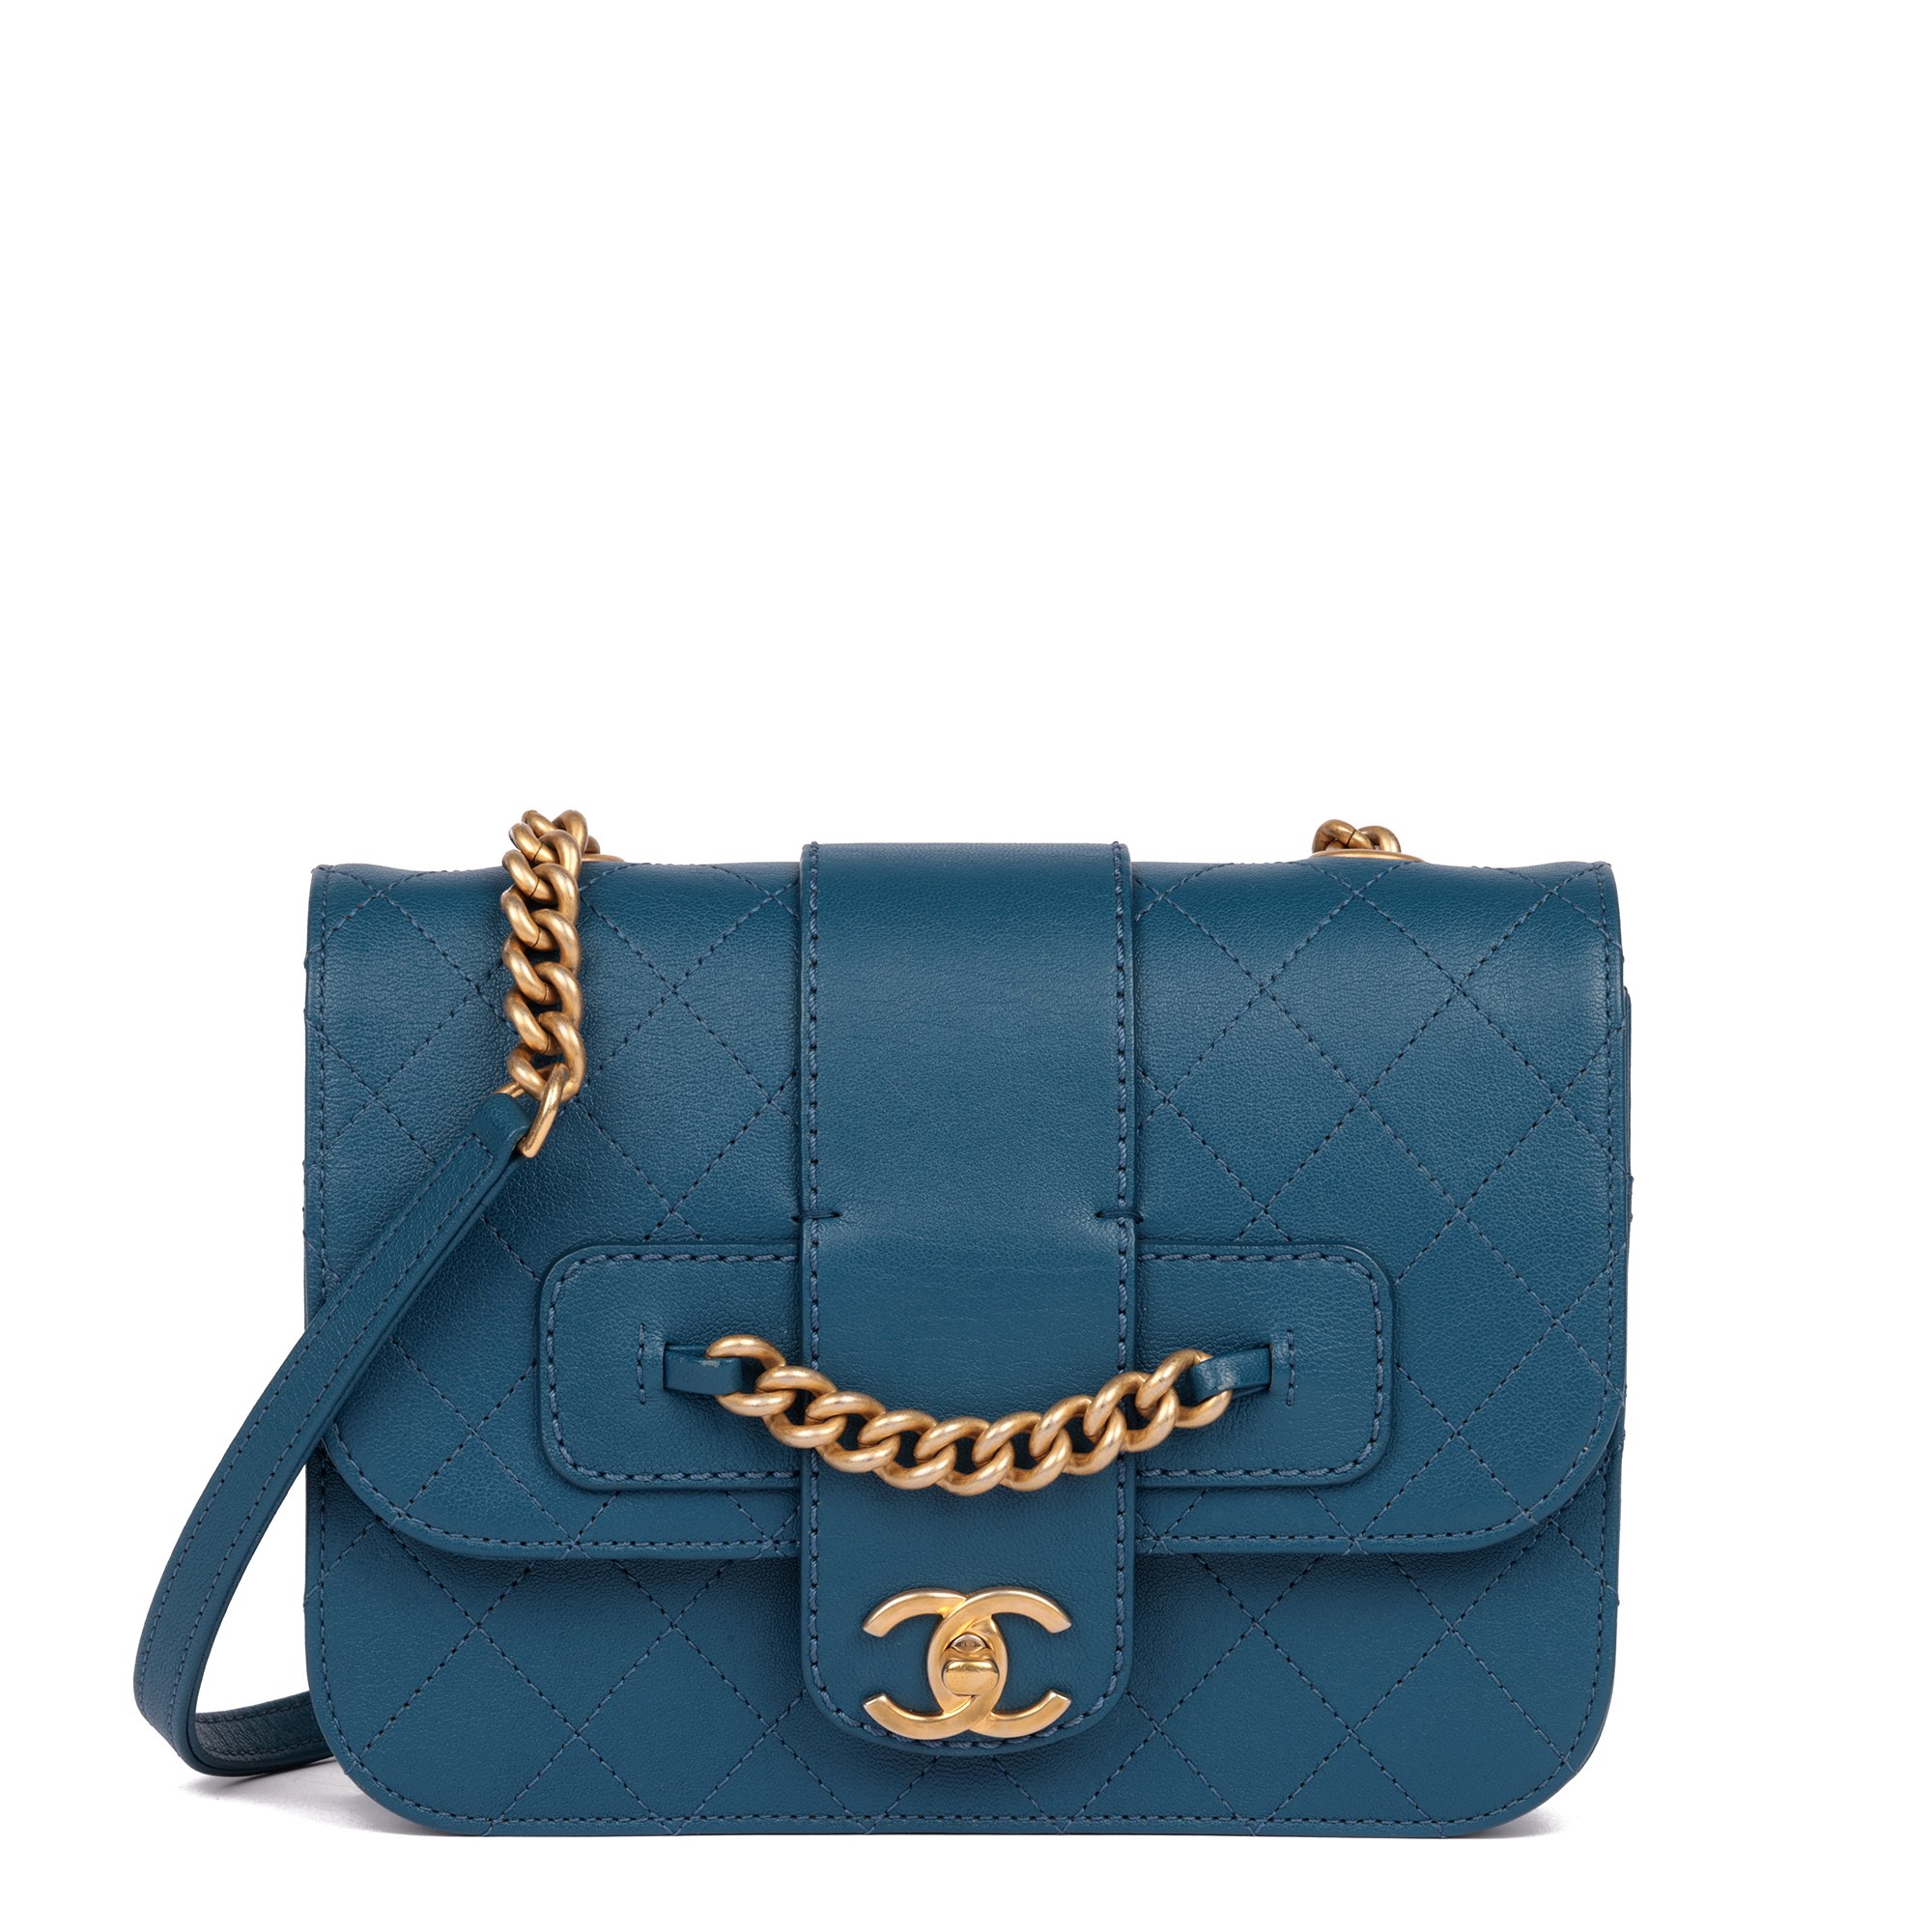 Chanel Blue Quilted Calfskin Leather Mini Chain Front Classic Single Flap Bag